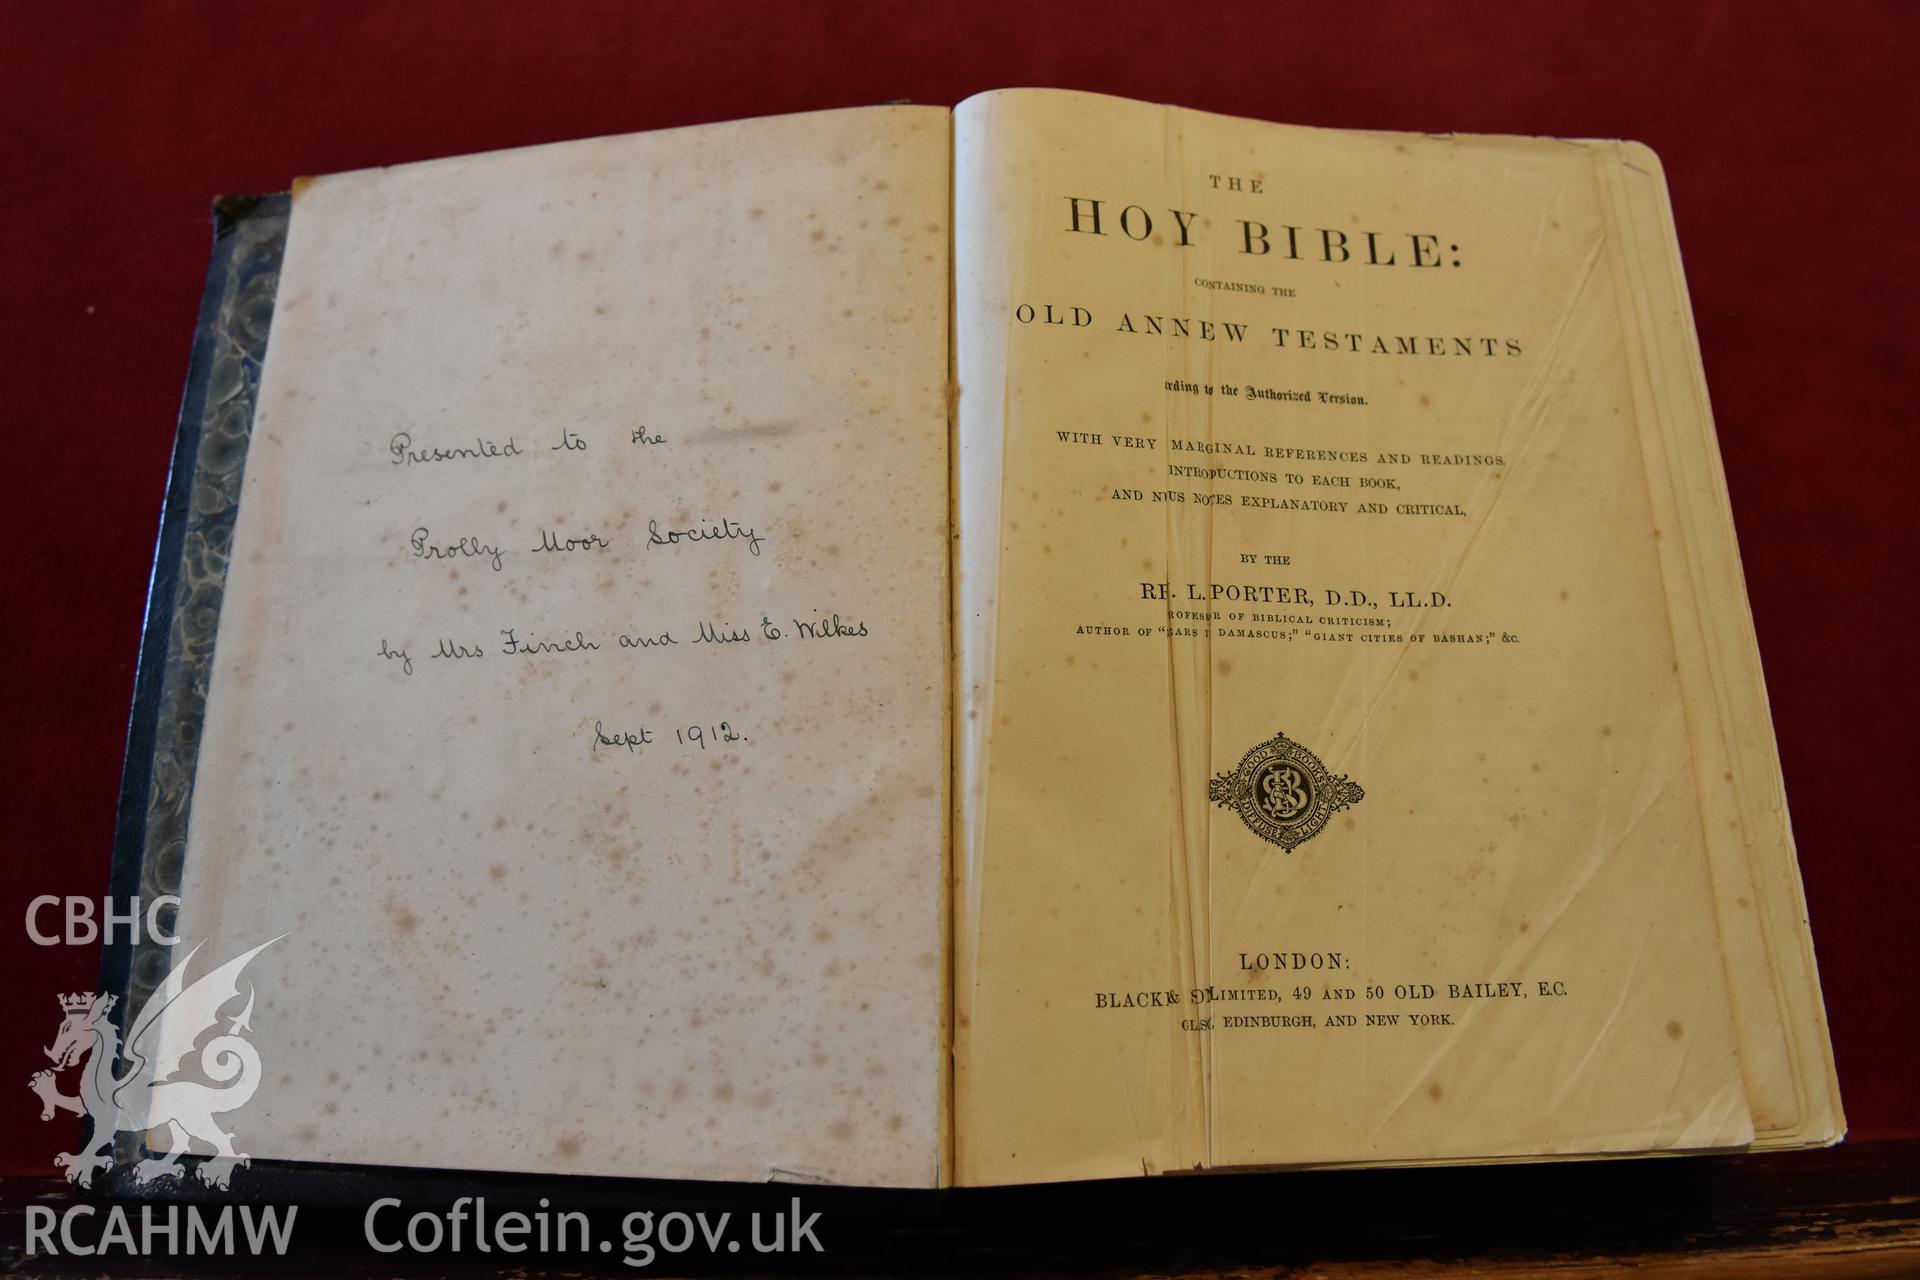 Frontispiece of older bible at Hyssington Primitive Methodist Chapel. Handwriting reads 'Presented to the/ Prolly Moor Society/ by Mrs Finch and Miss E. Wilkes/ Sept 1912. Photographic survey conducted by Sue Fielding on 7th December 2018.